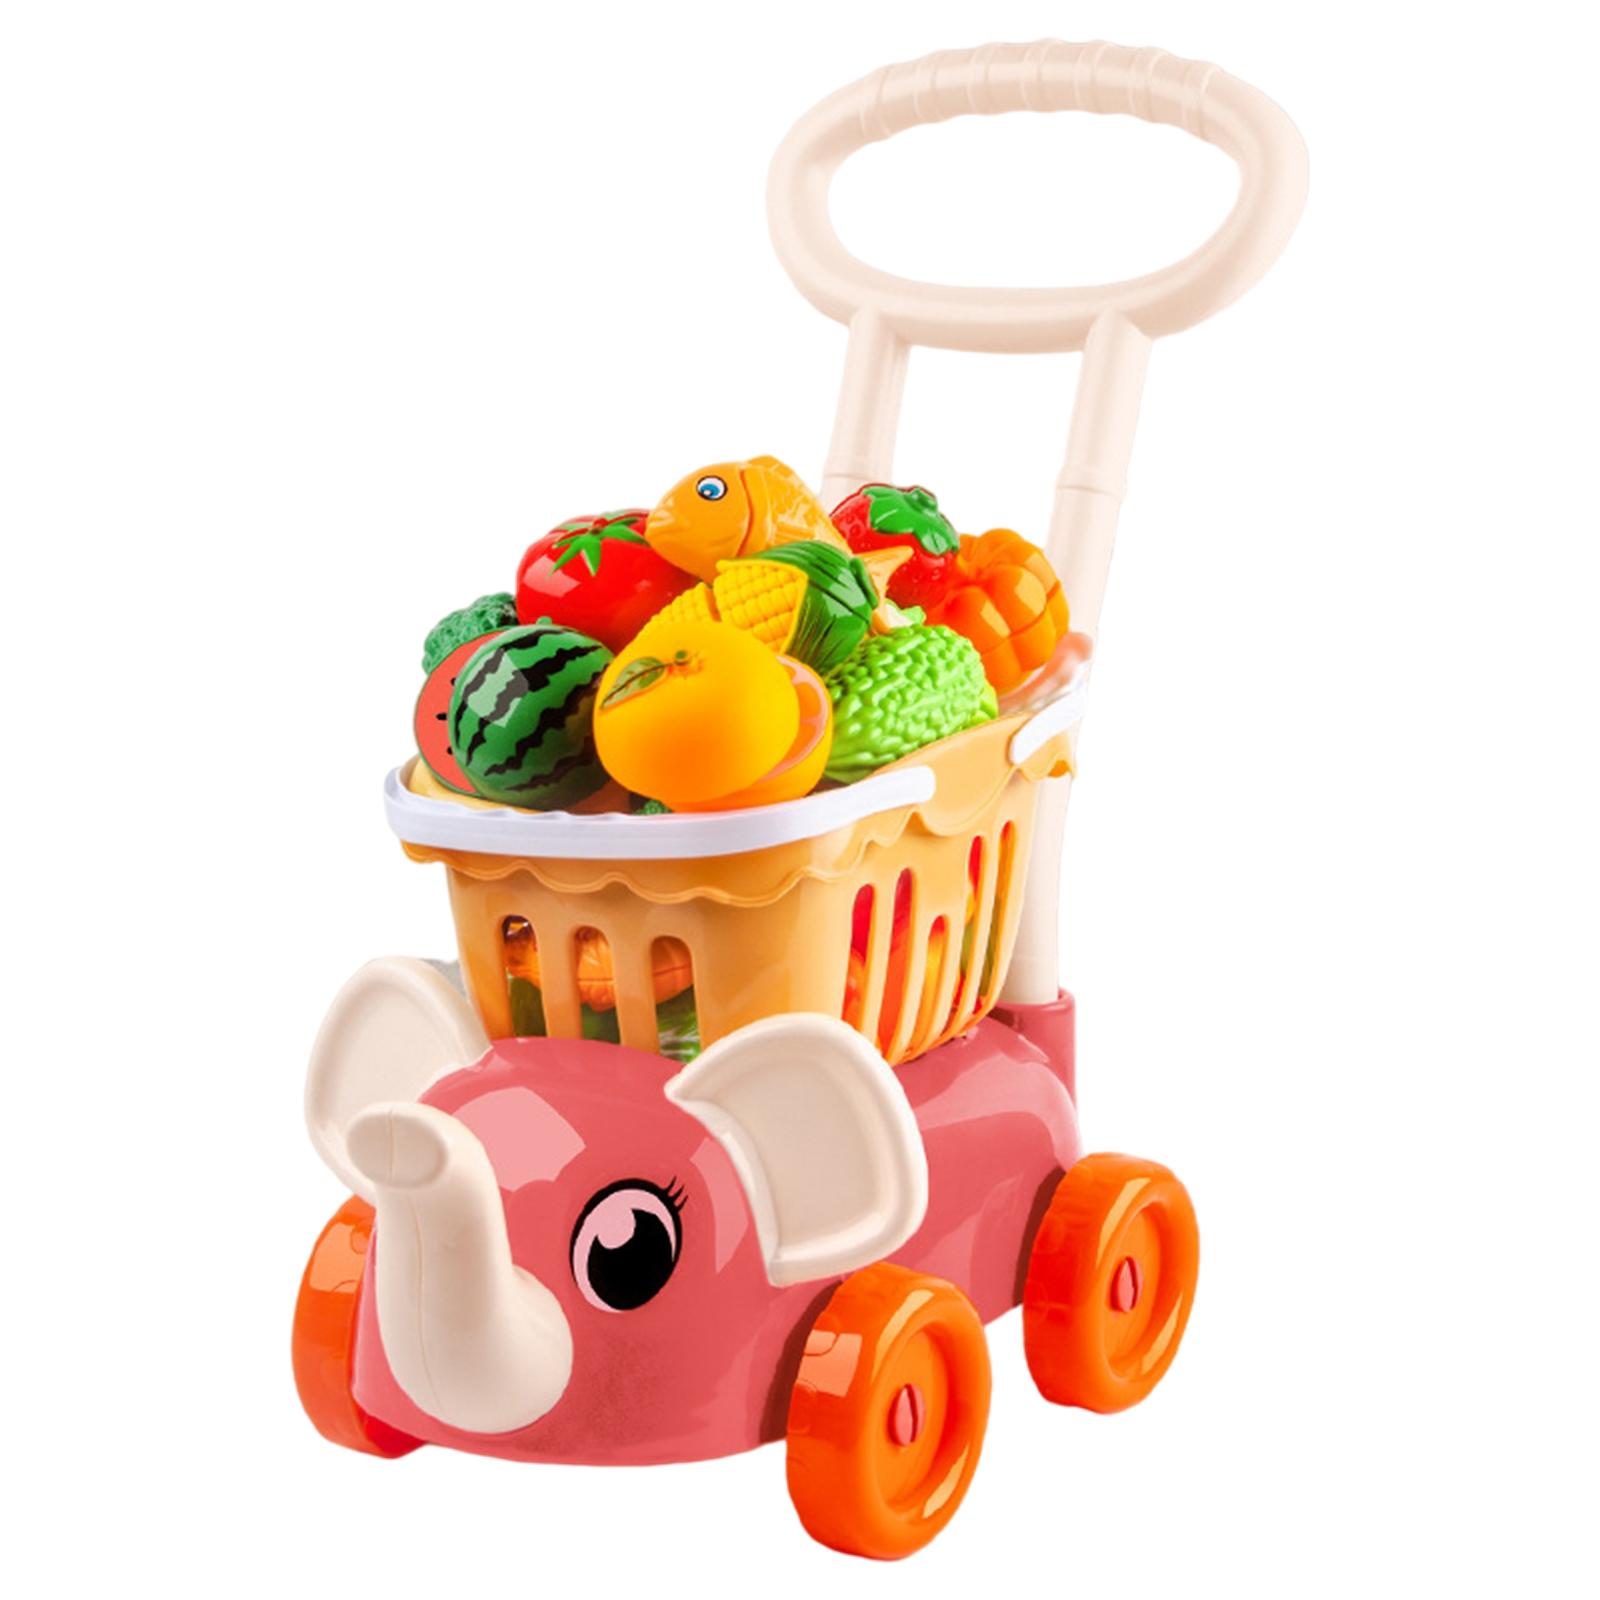 Simulation Deluxe Shopping Cart, Fruit and Cutting Food Playset Children Preschool Groceries Role toys